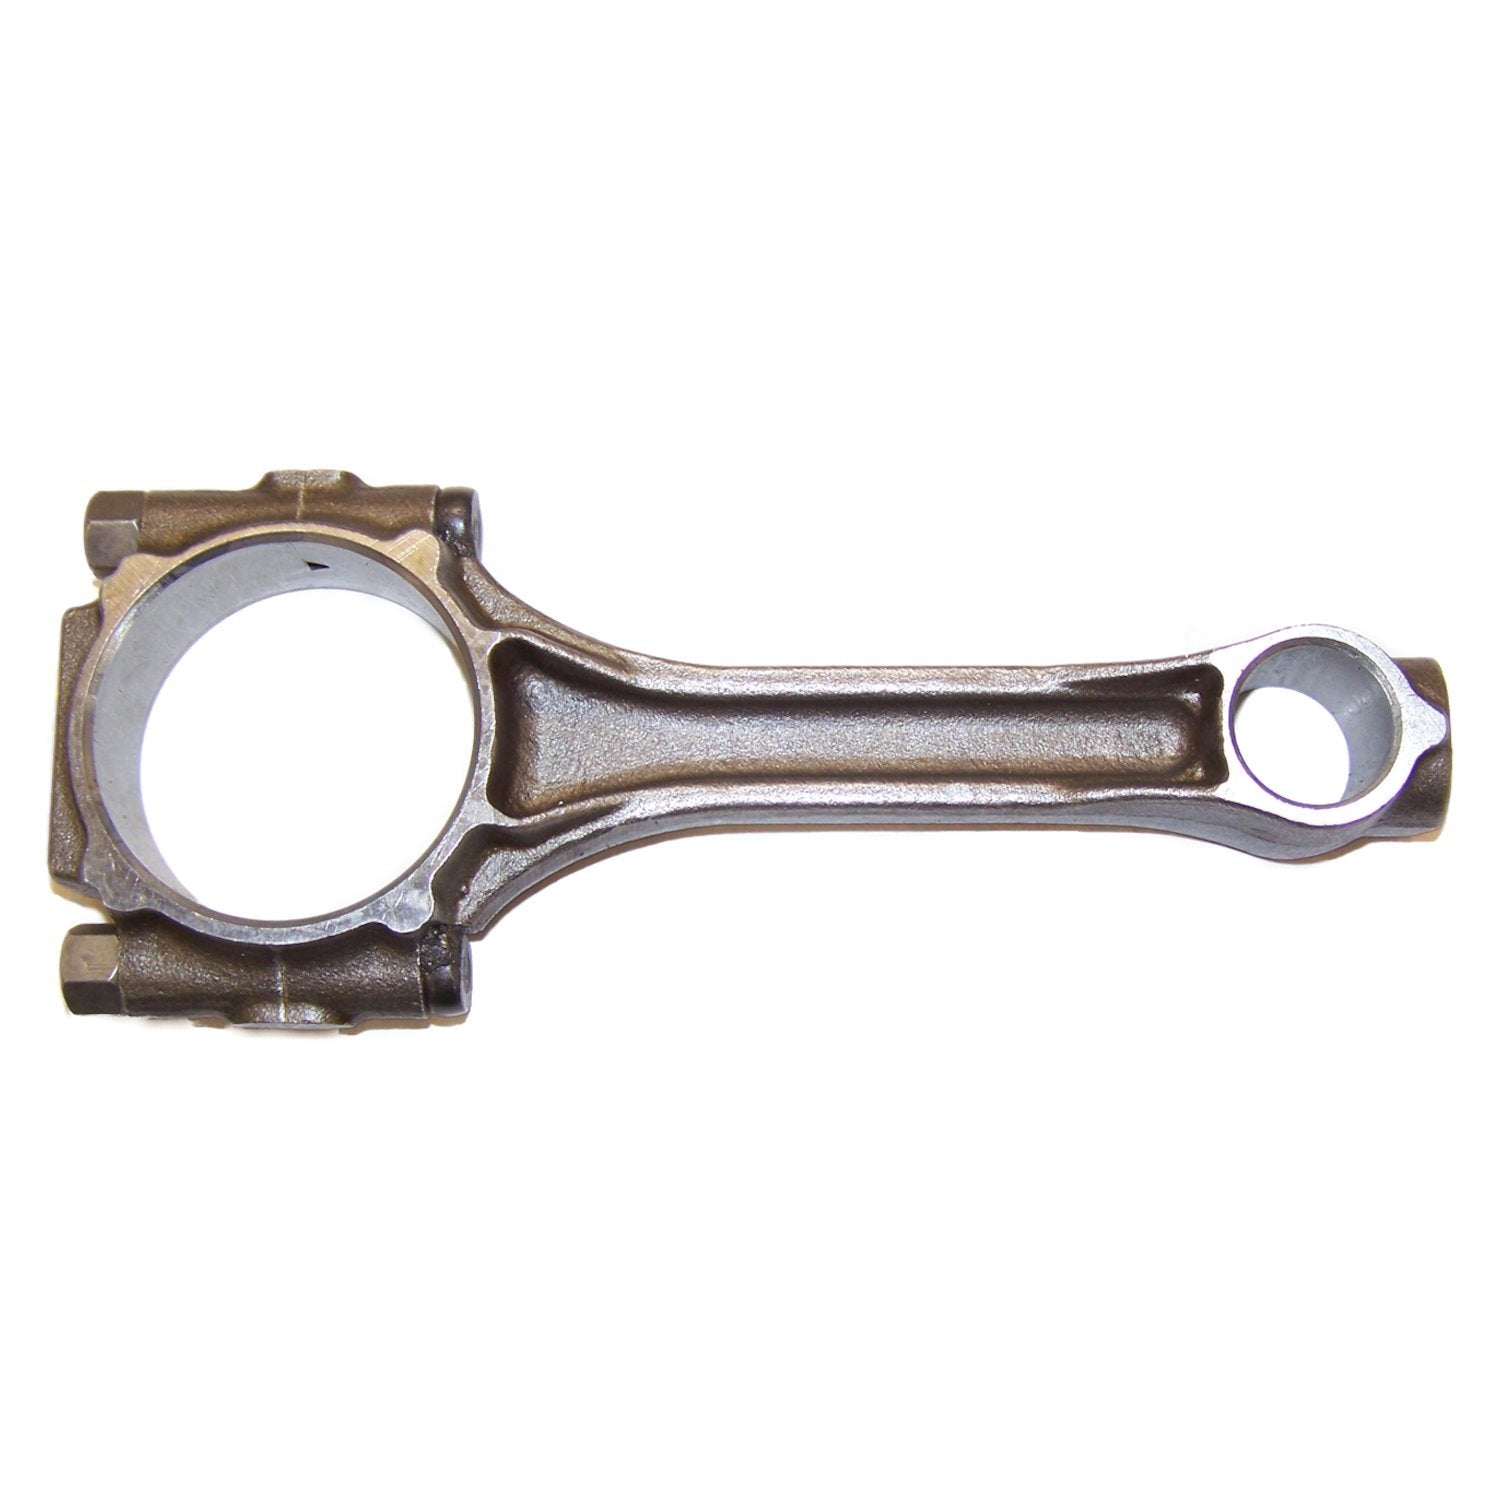 Connecting Rod for Misc. Jeep CJs, SJs, or J-Series 4.2L (S6-258),3.8L (S6-232)